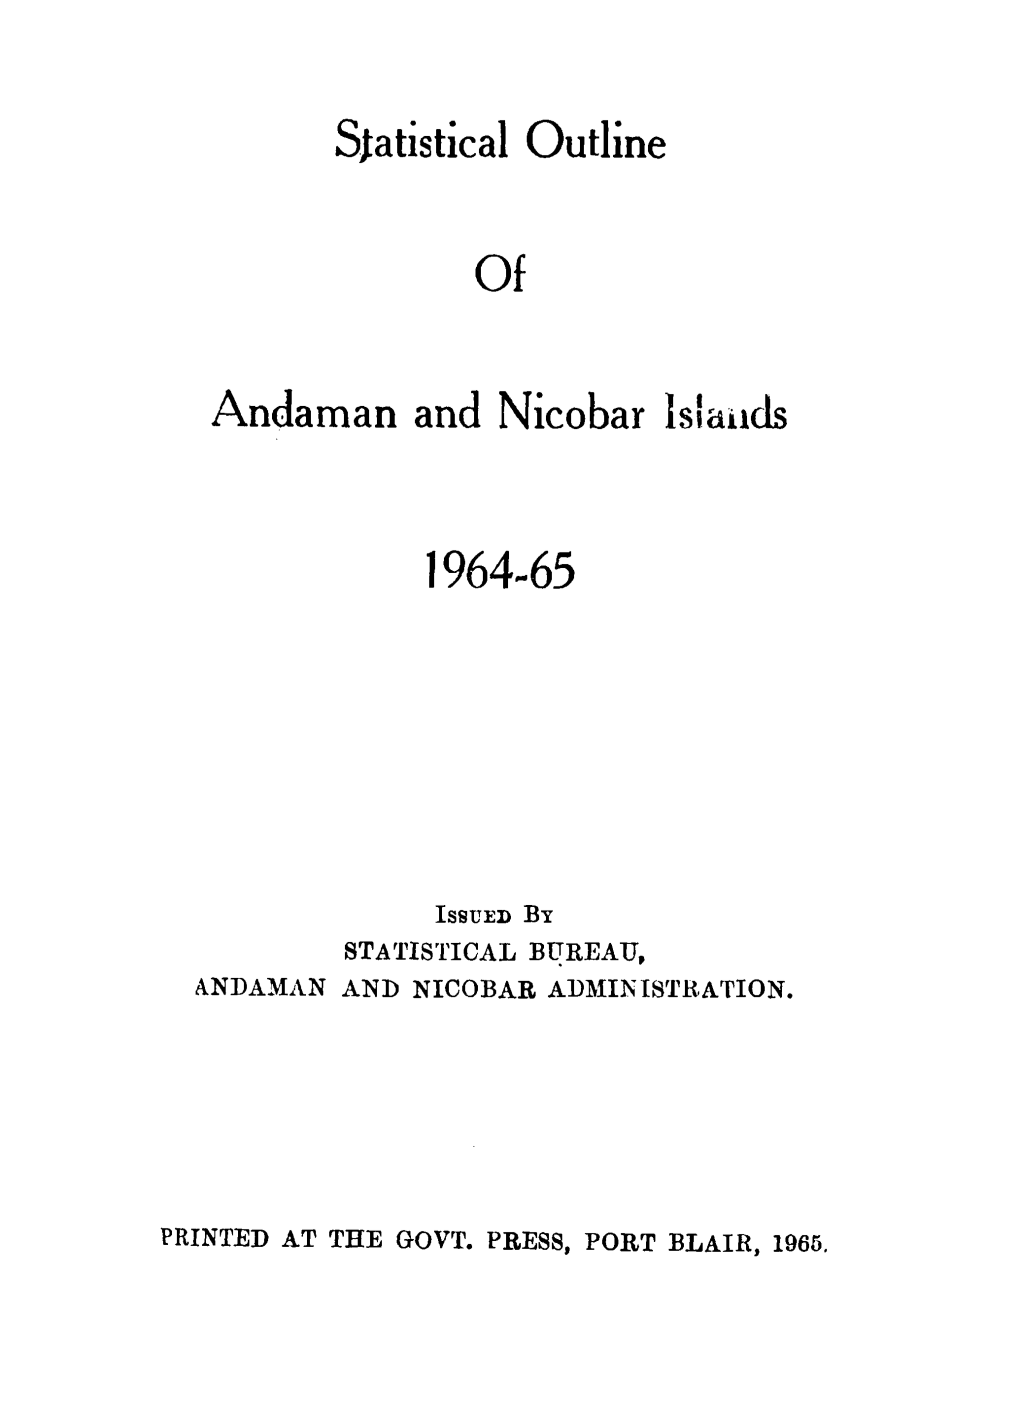 Statistical Outline of Andaman and Nicobar Isiaiids